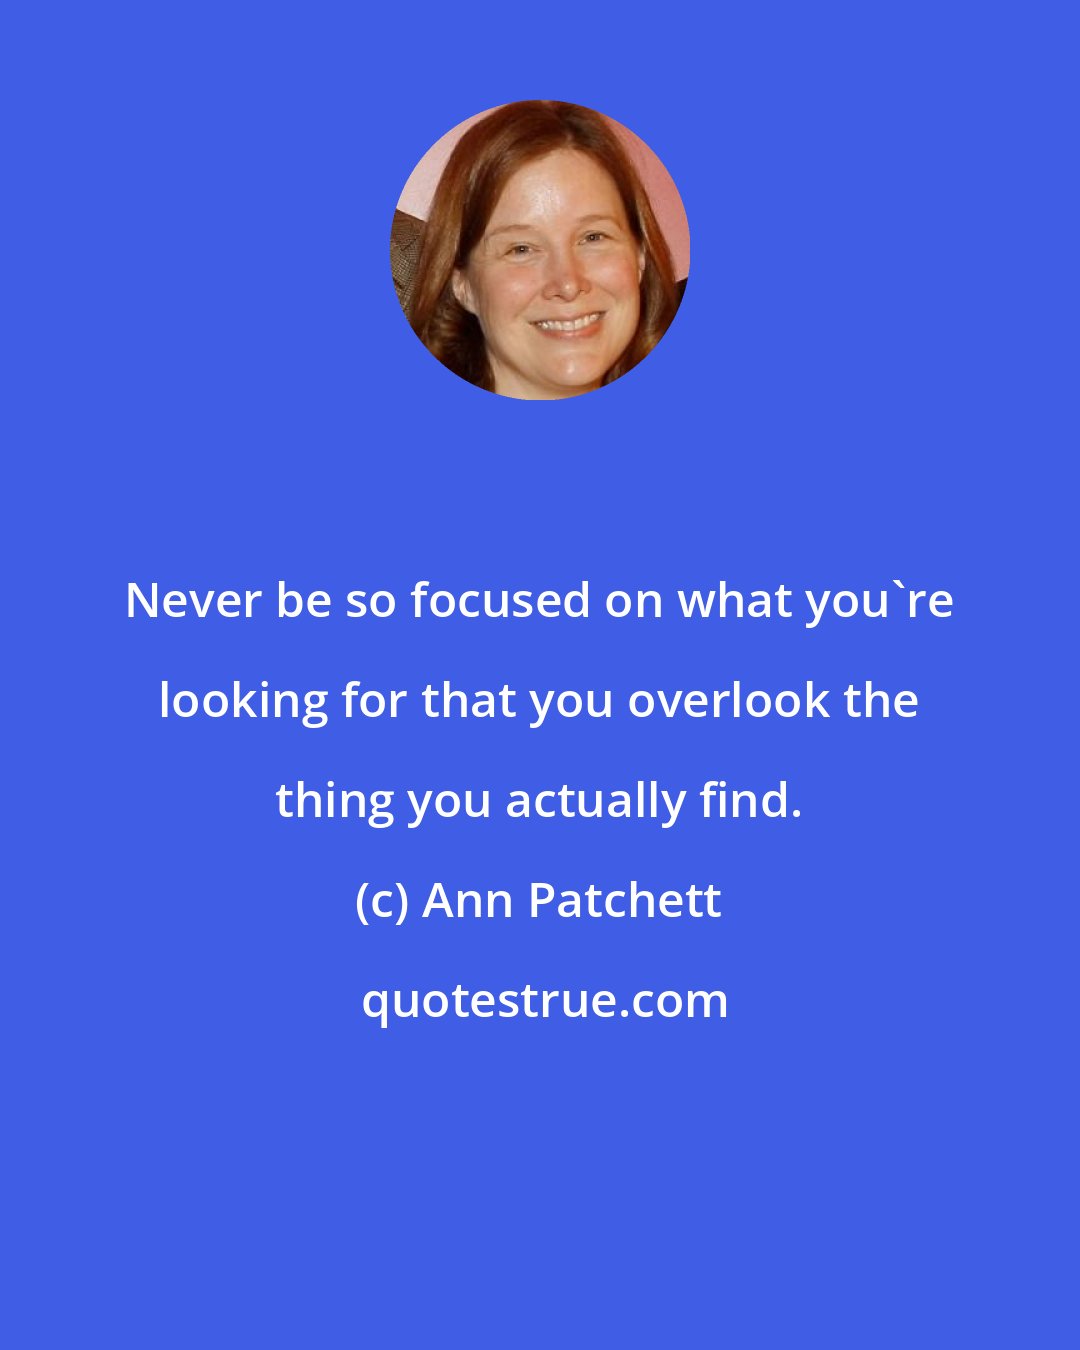 Ann Patchett: Never be so focused on what you're looking for that you overlook the thing you actually find.